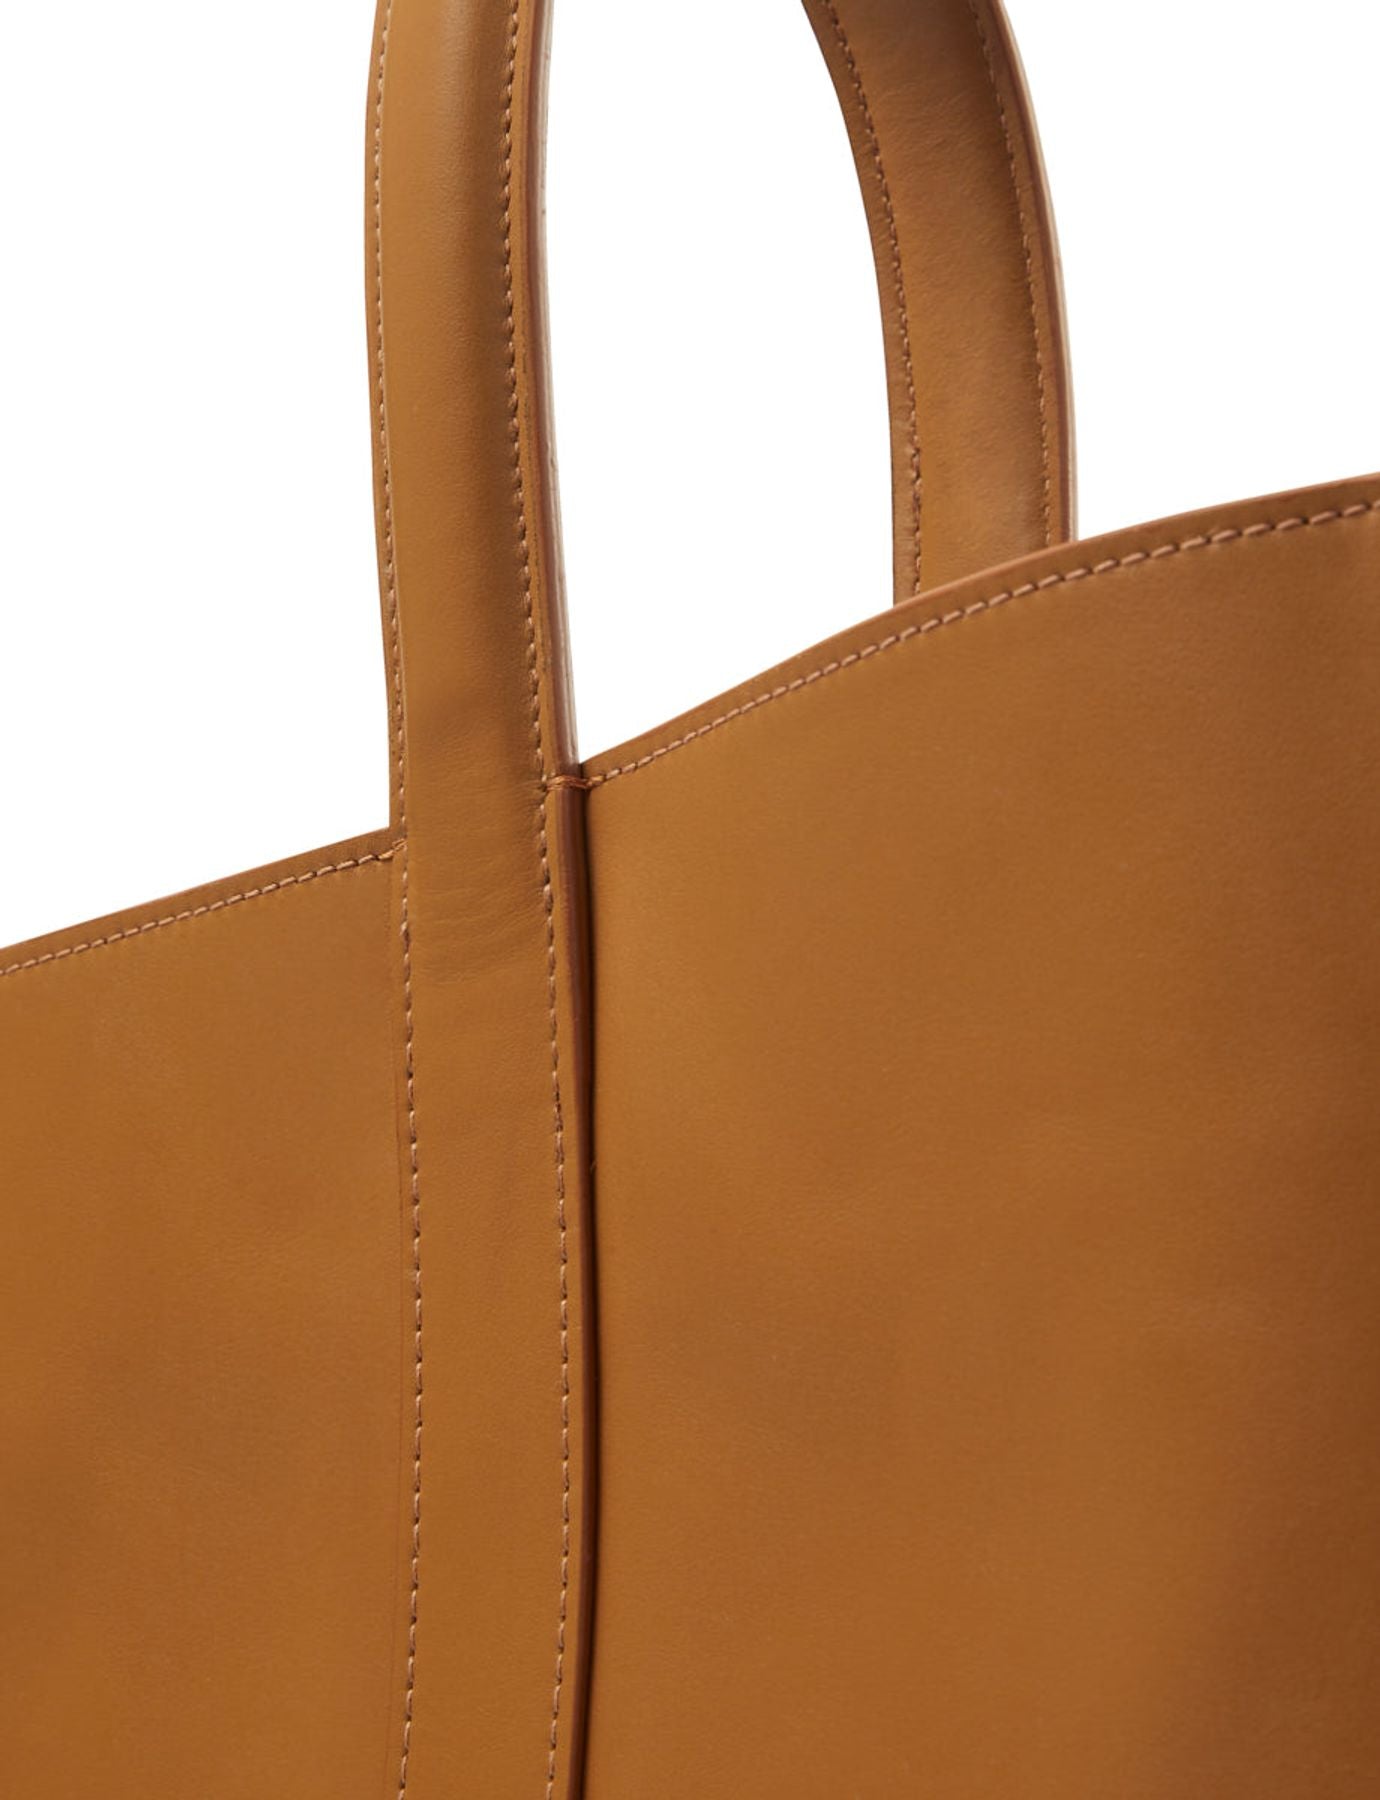 bag-leonore-size-in-camel-leather